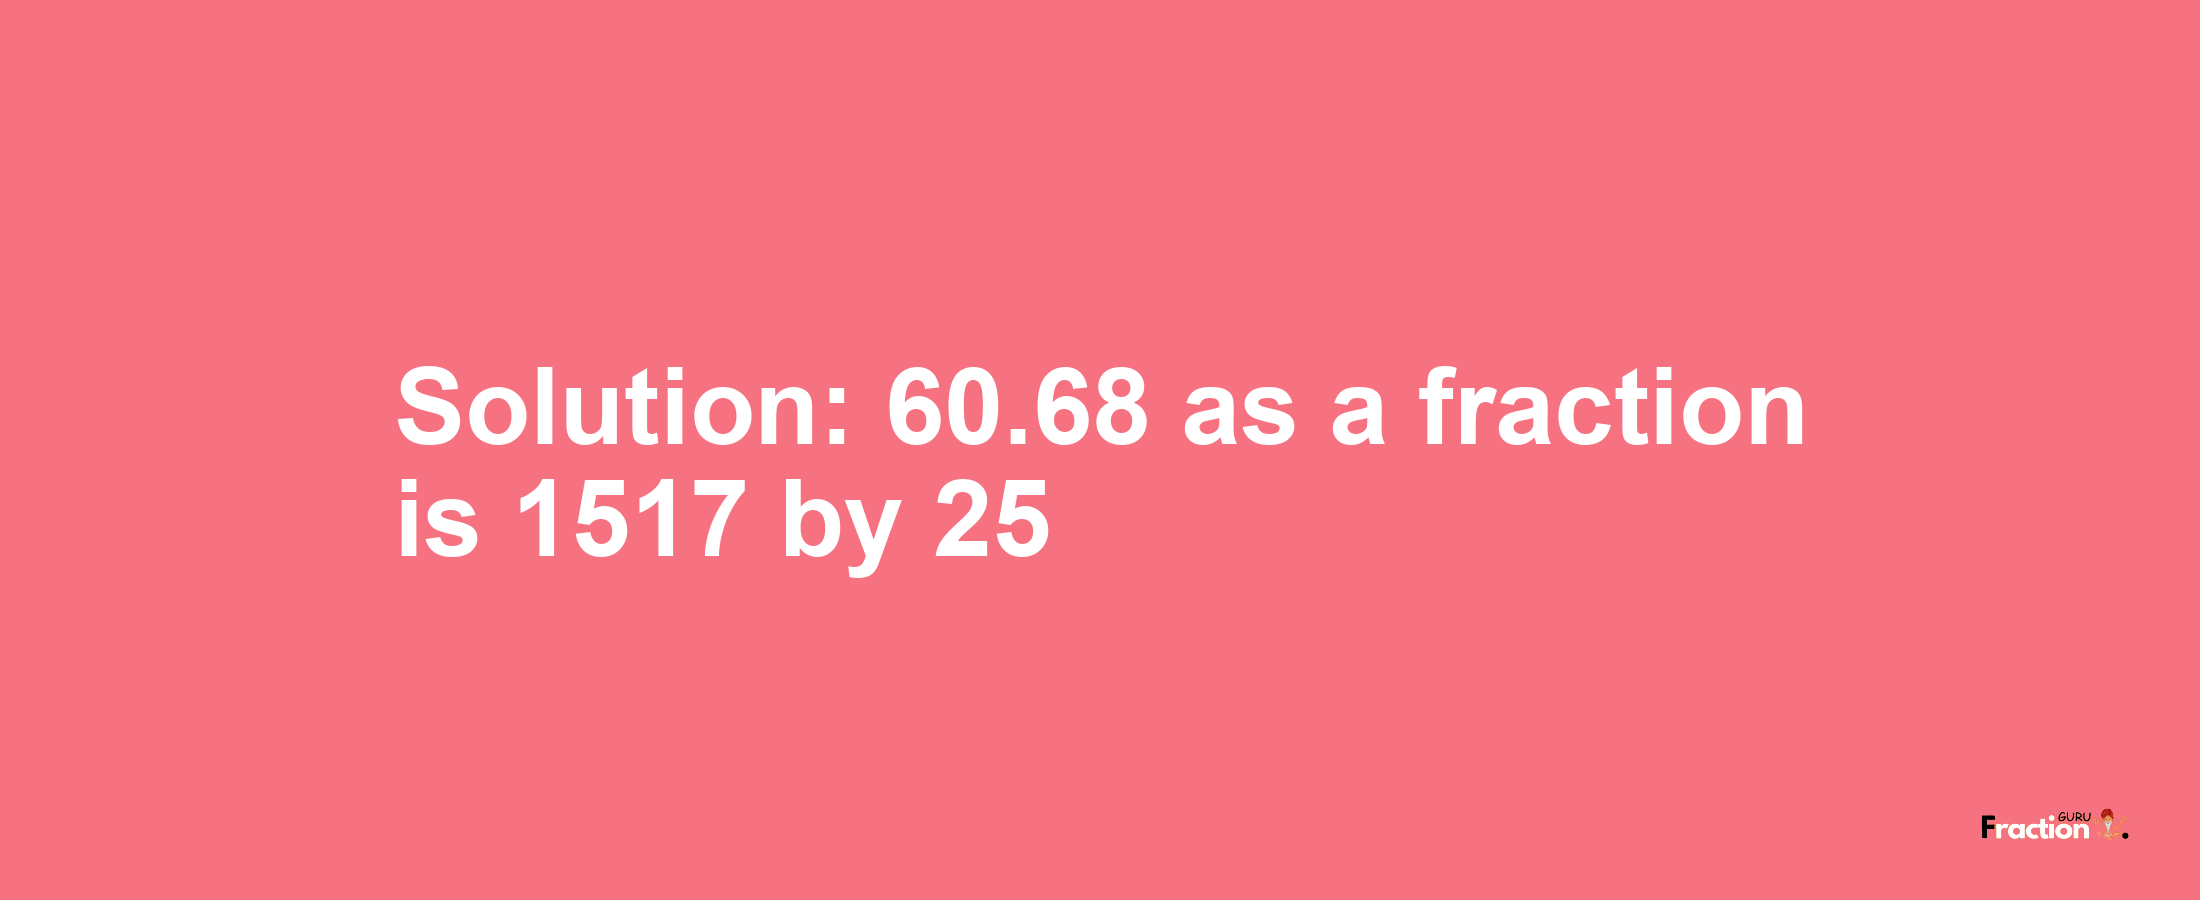 Solution:60.68 as a fraction is 1517/25